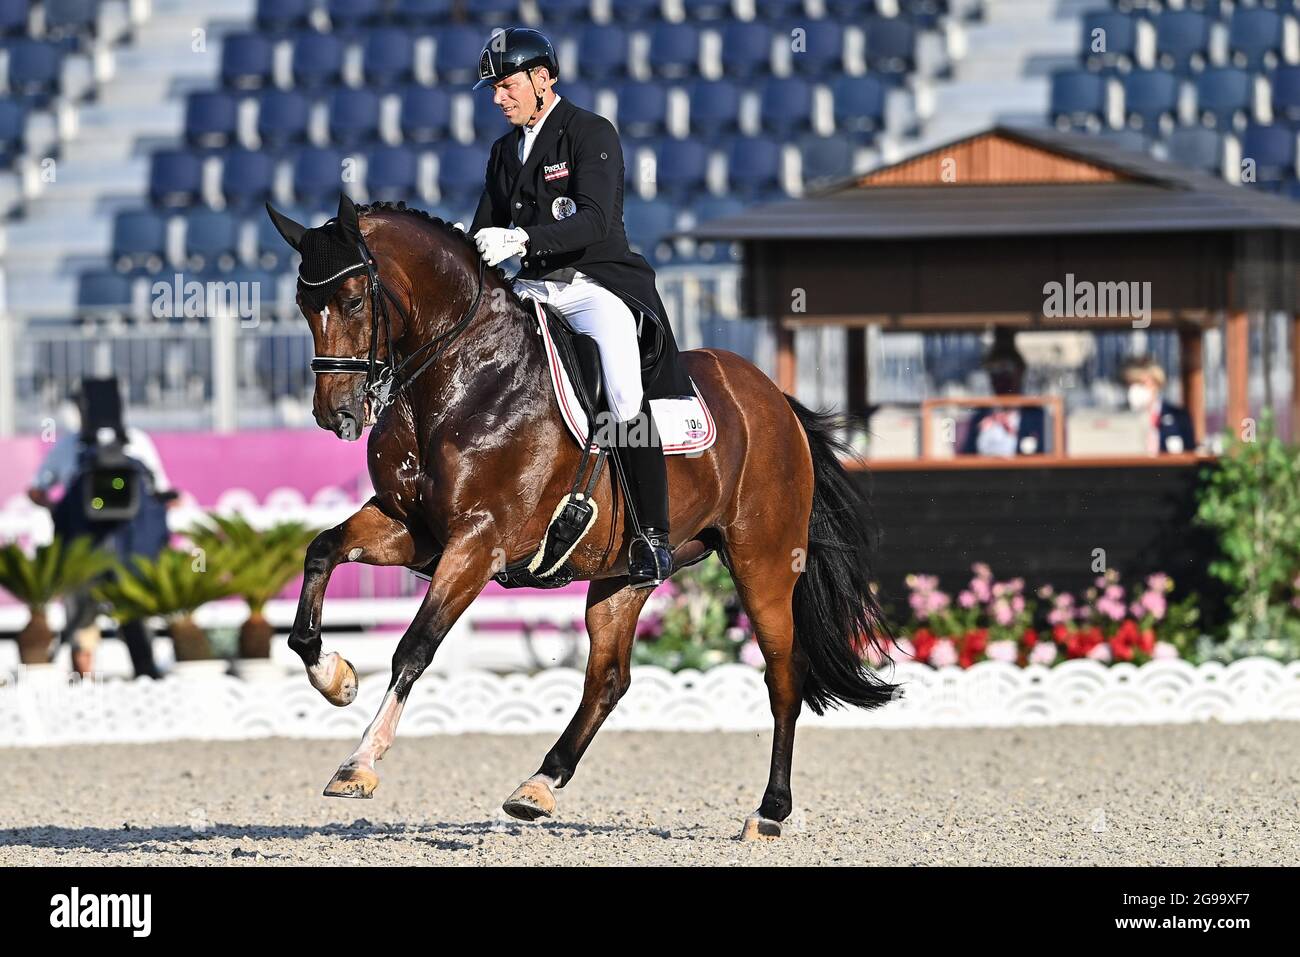 (210725) -- TOKYO, July 25, 2021 (Xinhua) -- Christian Schumach of Austria and his horse participate in the equestrian dressage grand prix team and individual qualifier at the Tokyo 2020 Olympic Games in Tokyo, Japan, July 25, 2021. (Xinhua/Zhu Zheng) Stock Photo